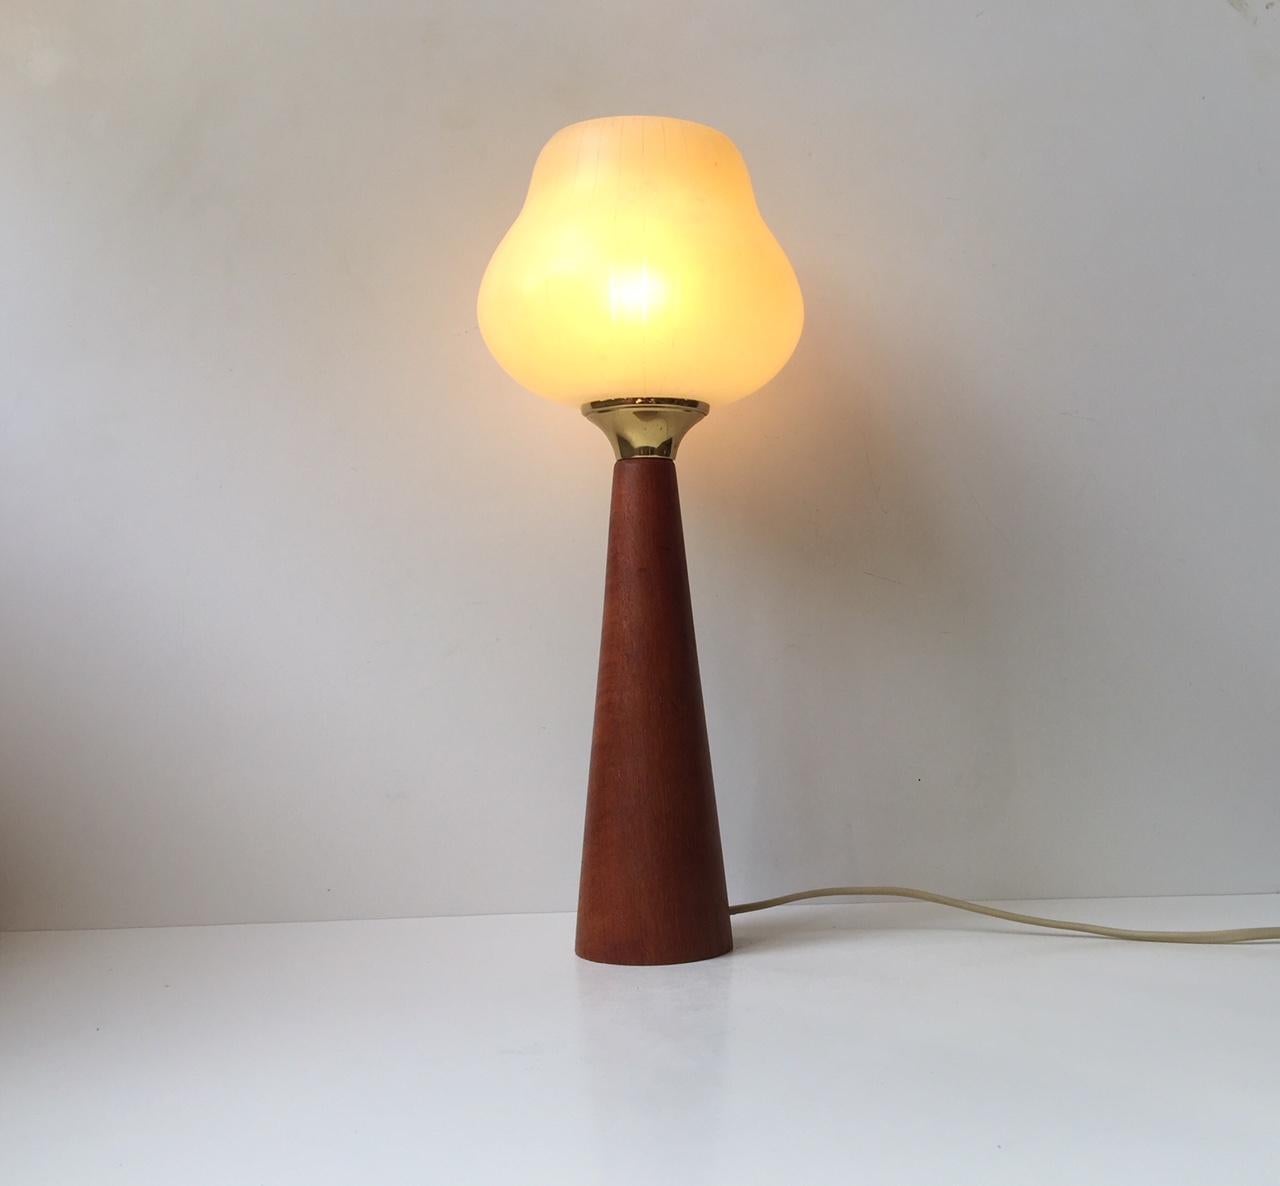 A table lamp composed of a conical solid teak base, a brass socket and a pin-striped single layered glass shade in an organic shape. It was made in Scandinavia during the 1960s in a style reminiscent of Gino Sarfatti.